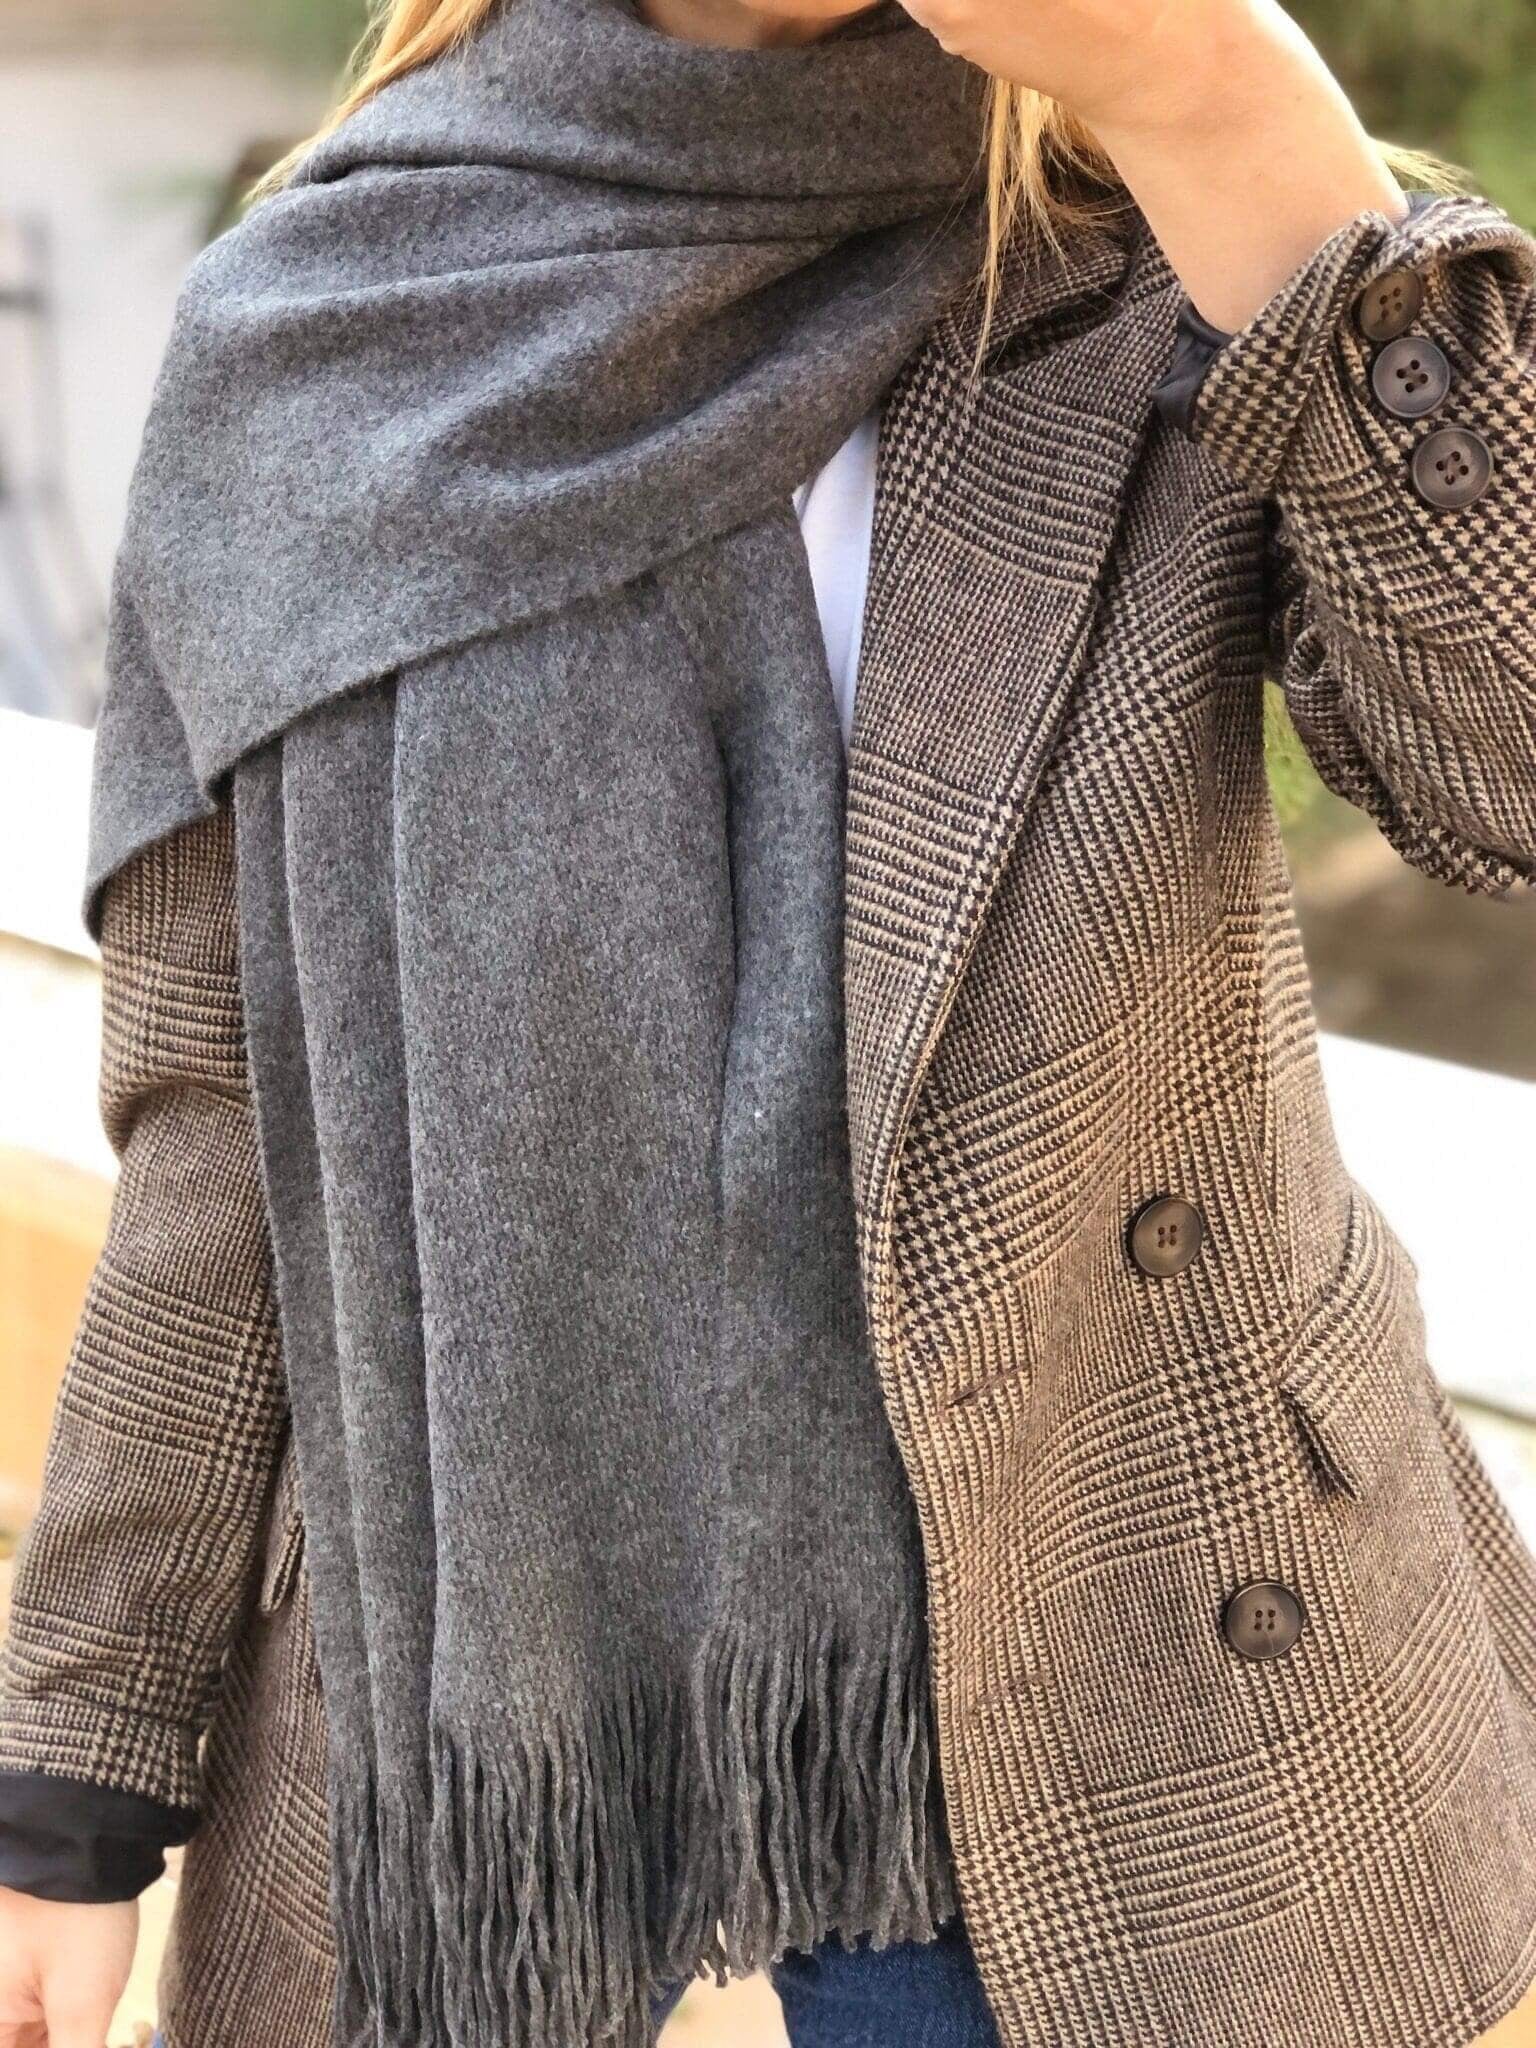 Wool Acrylic Shawl, Spring Winter Autumn Shawl, Gift for Her, Gray Shawl for Women, Anthracite Gray Warm Blanket Neck Scarf